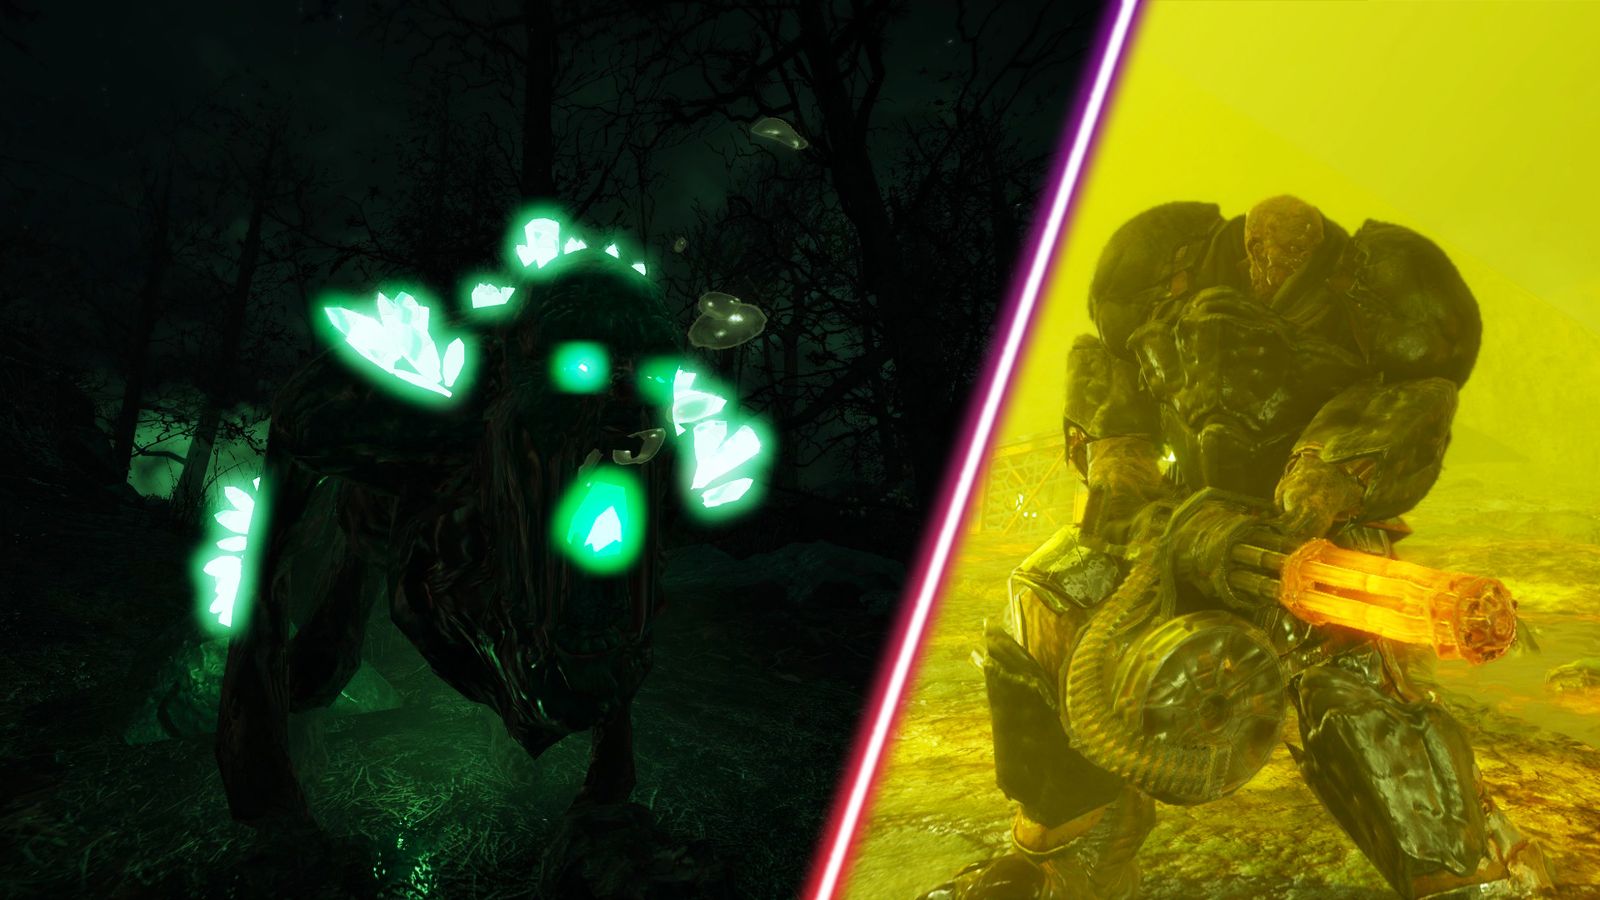 Some new radioactive enemies in Fallout 4.